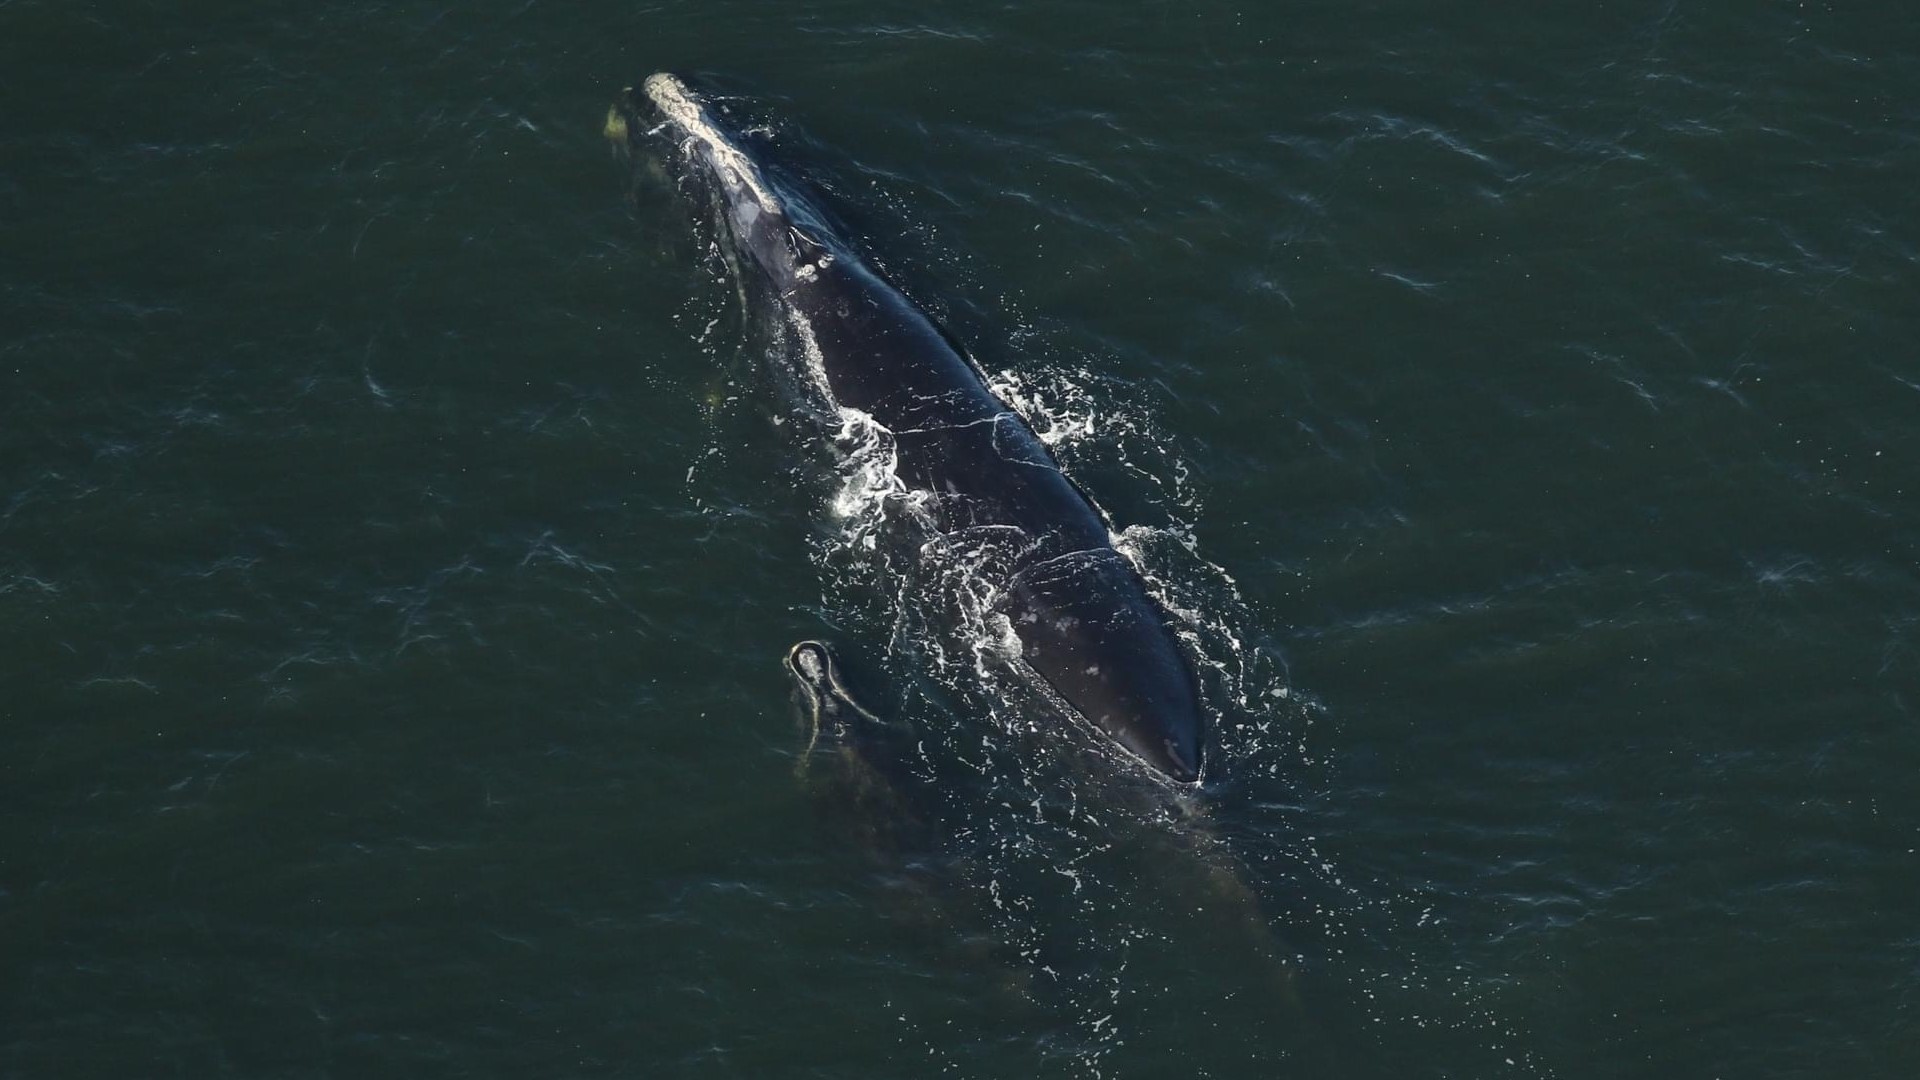 The adult whale, Catalog #1425 'Butterfly', who is at least 43 years old, was seen with her fifth calf.